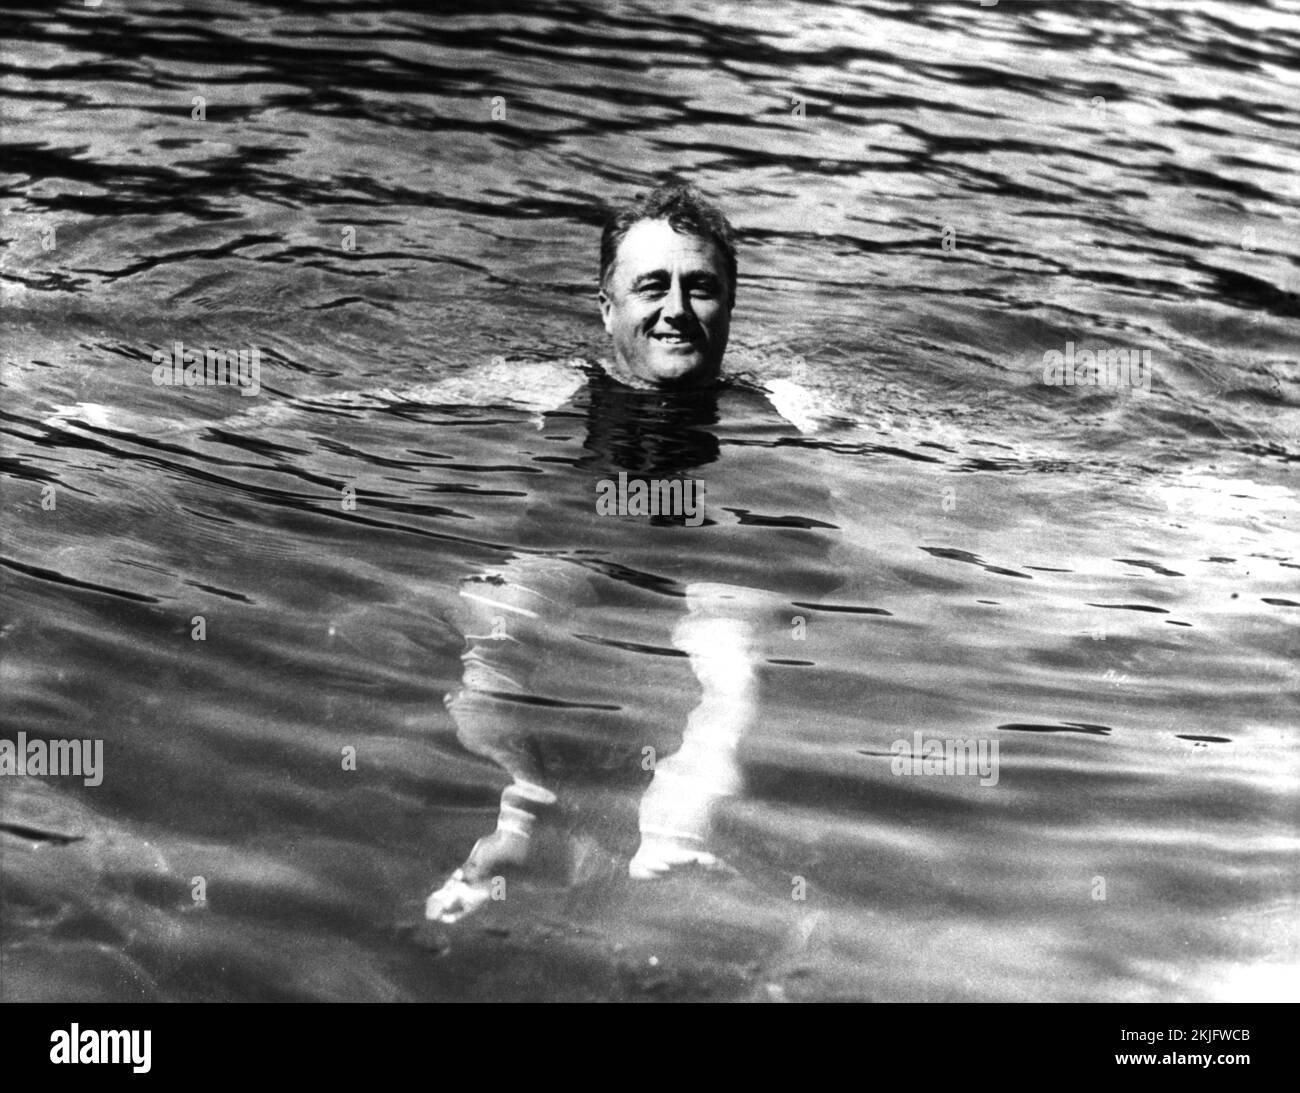 US President Franklin Roosevelt bathing at Warm Springs in Georgia where he went for physiotherapy and hydrotherapy. Photo credit  https://commons.wikimedia.org/w/index.php?curid=43558708 Stock Photo